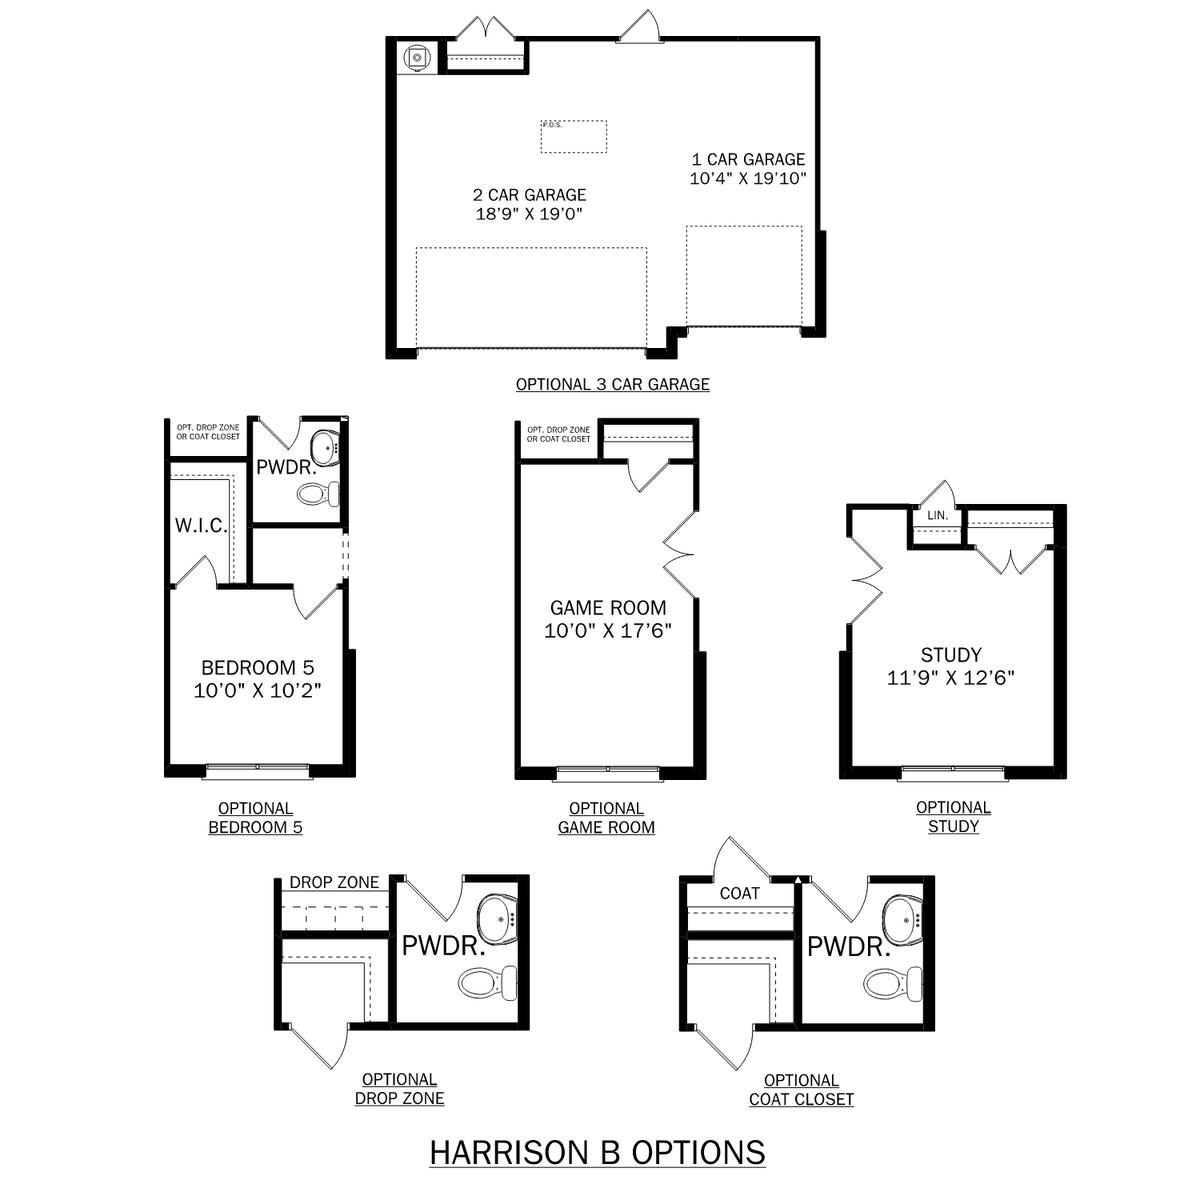 2 - The Harrison B floor plan layout for 600 Ronnie Drive in Davidson Homes' Cain Park community.